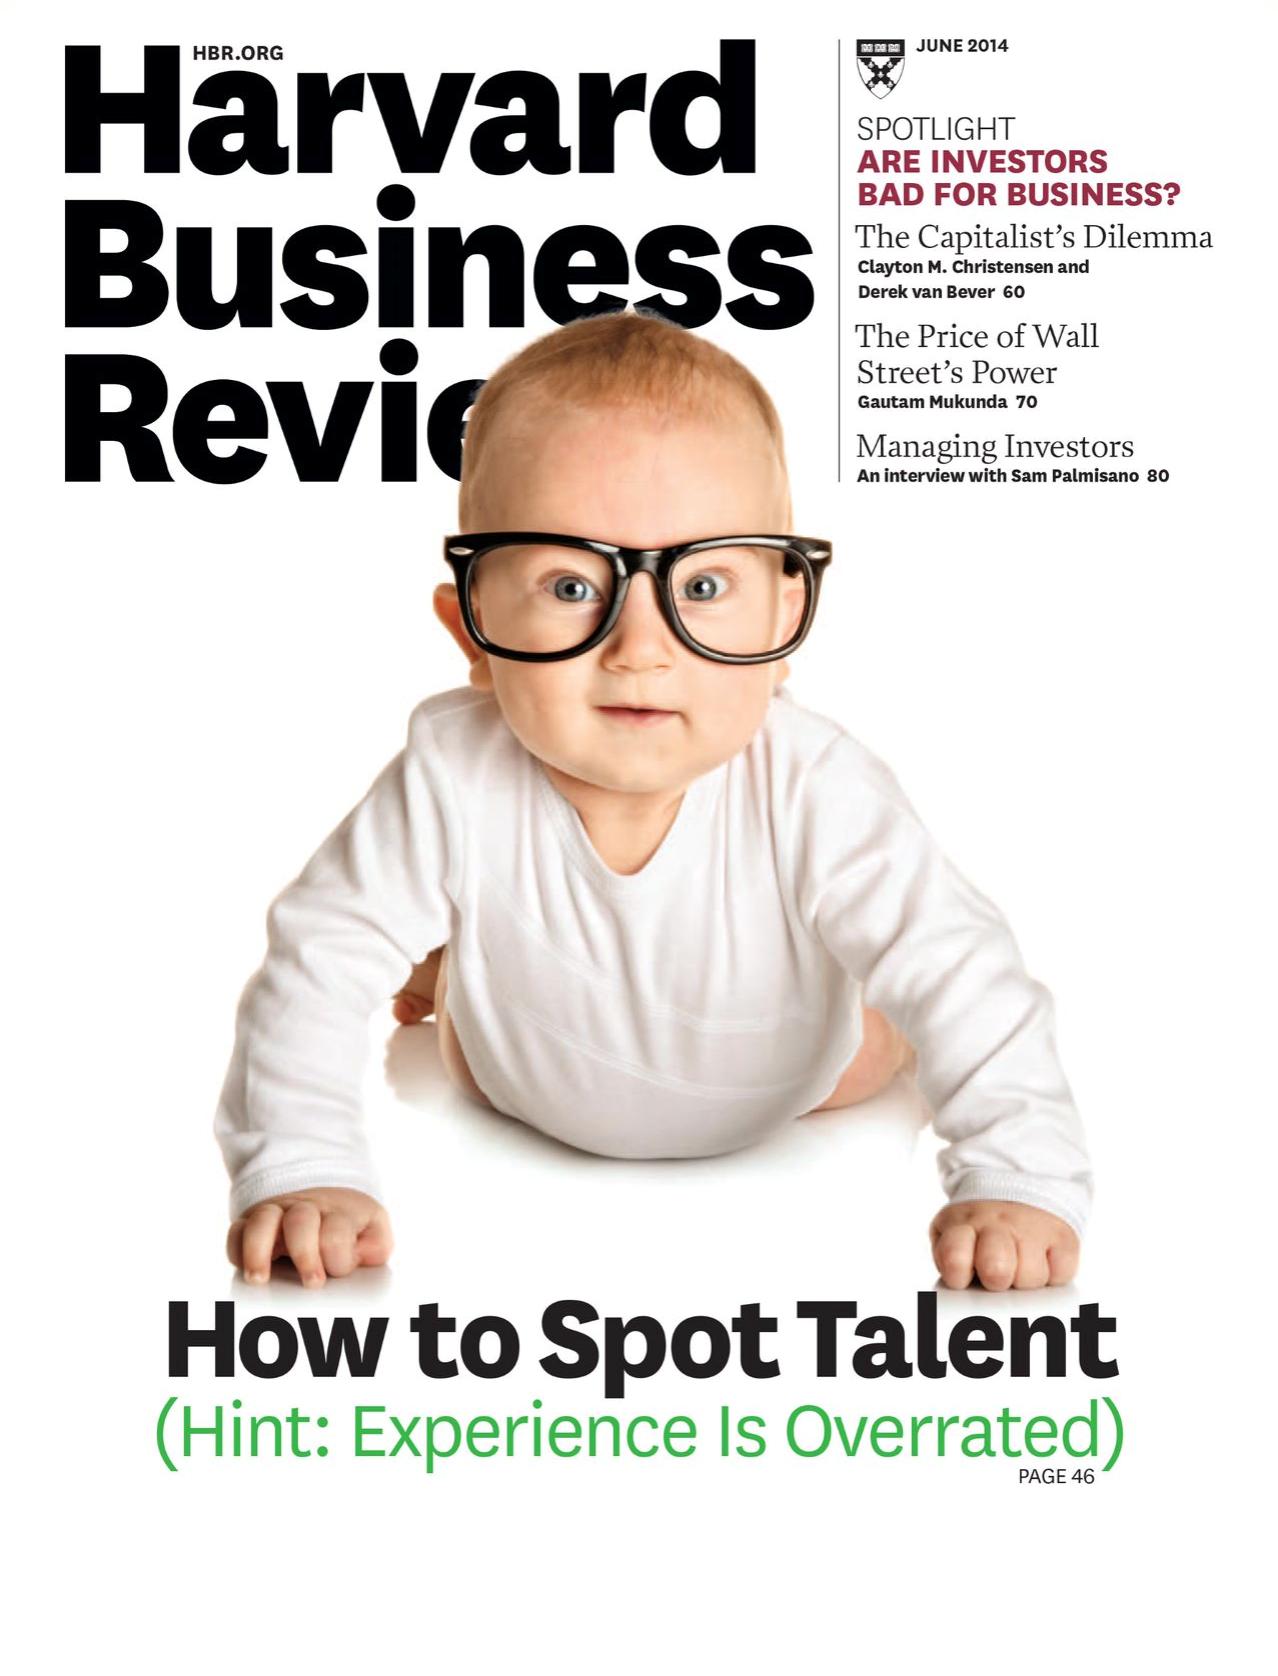 Harvard Business Review - How to Stop Talent?